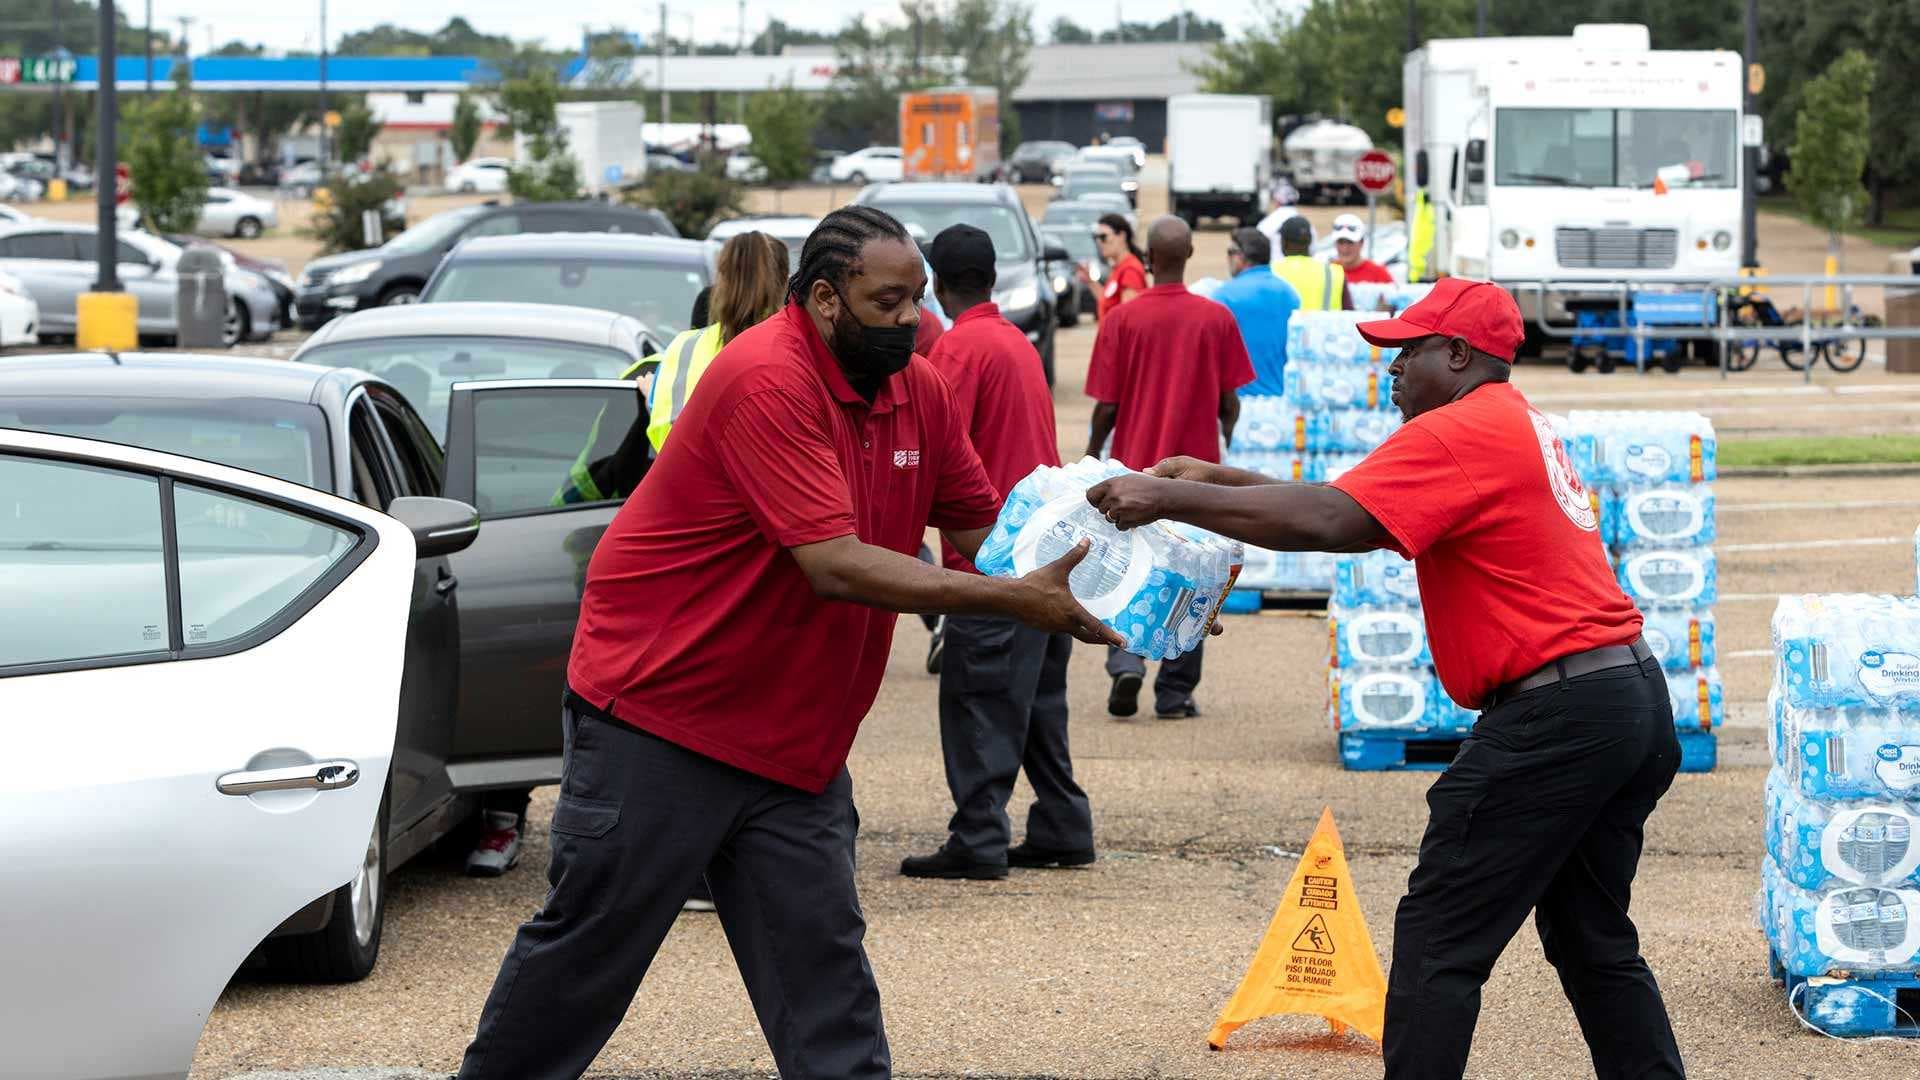 The Salvation Army of Jackson and Walmart distribute bottled water